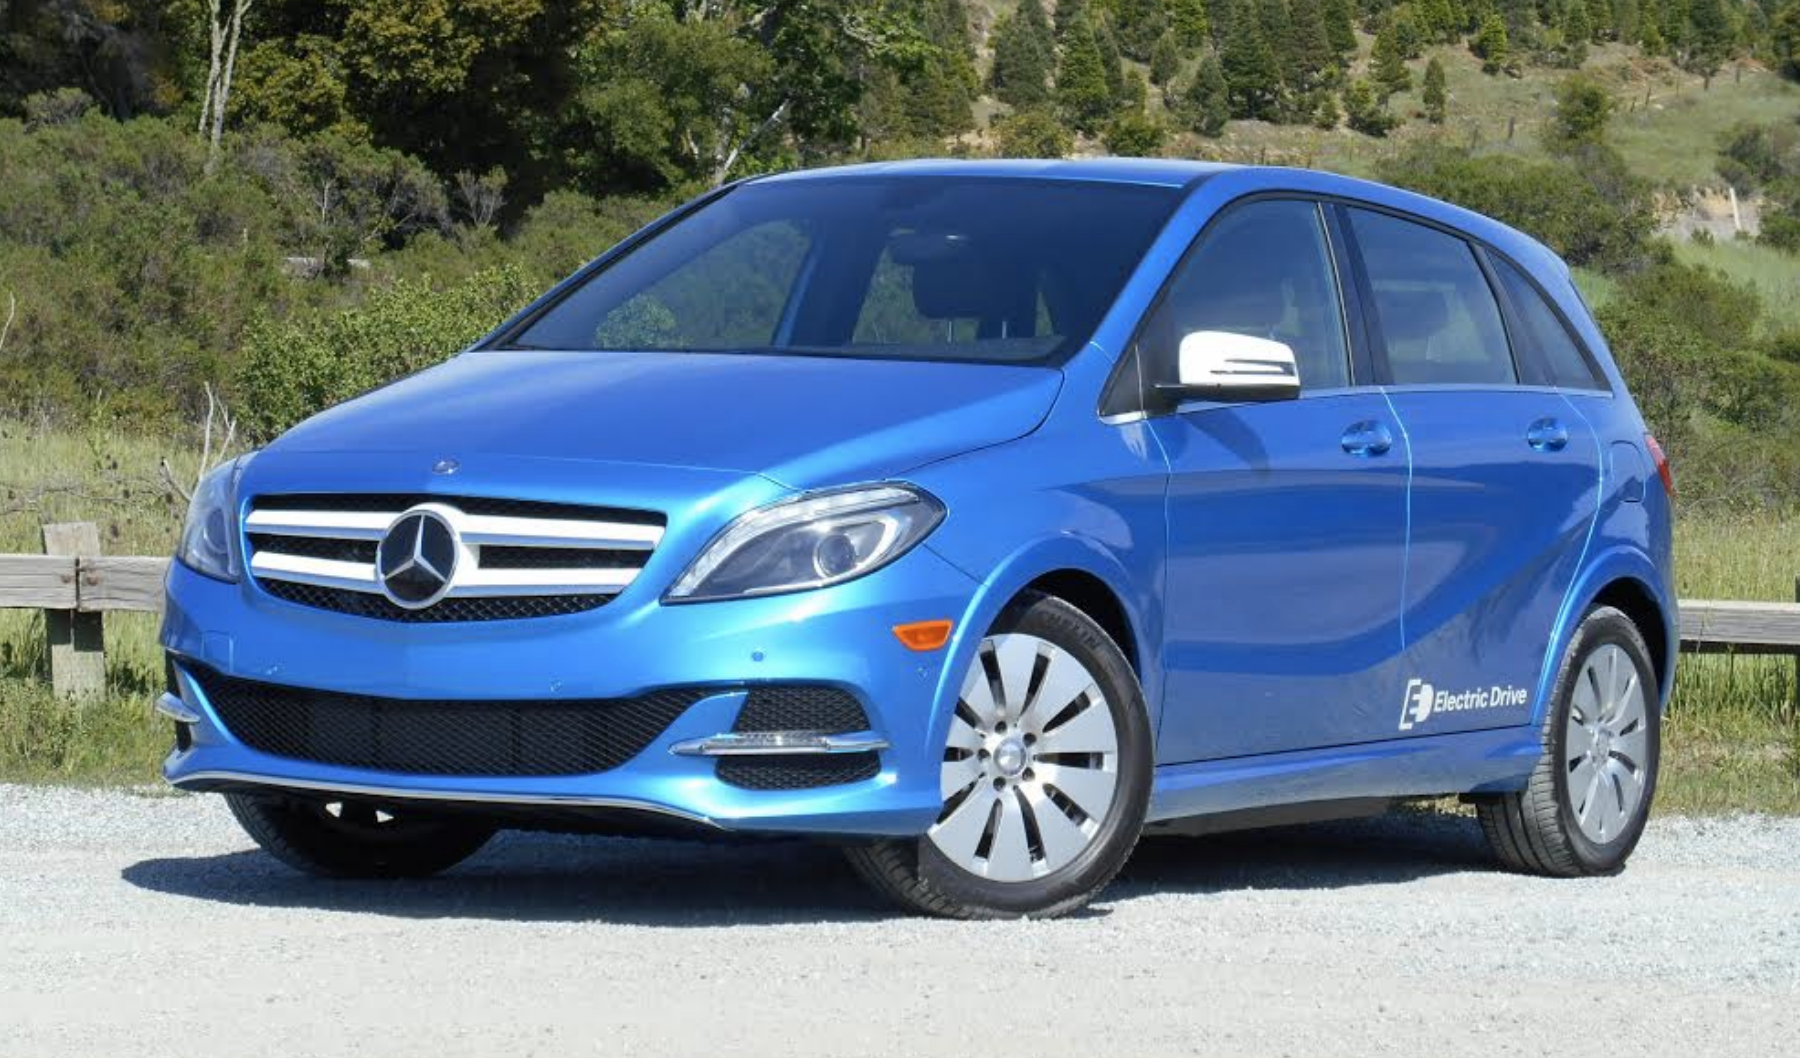 2014 Mercedes-Benz B-Class Electric Drive: Class of the Electric Class |  The Daily Drive | Consumer Guide® The Daily Drive | Consumer Guide®